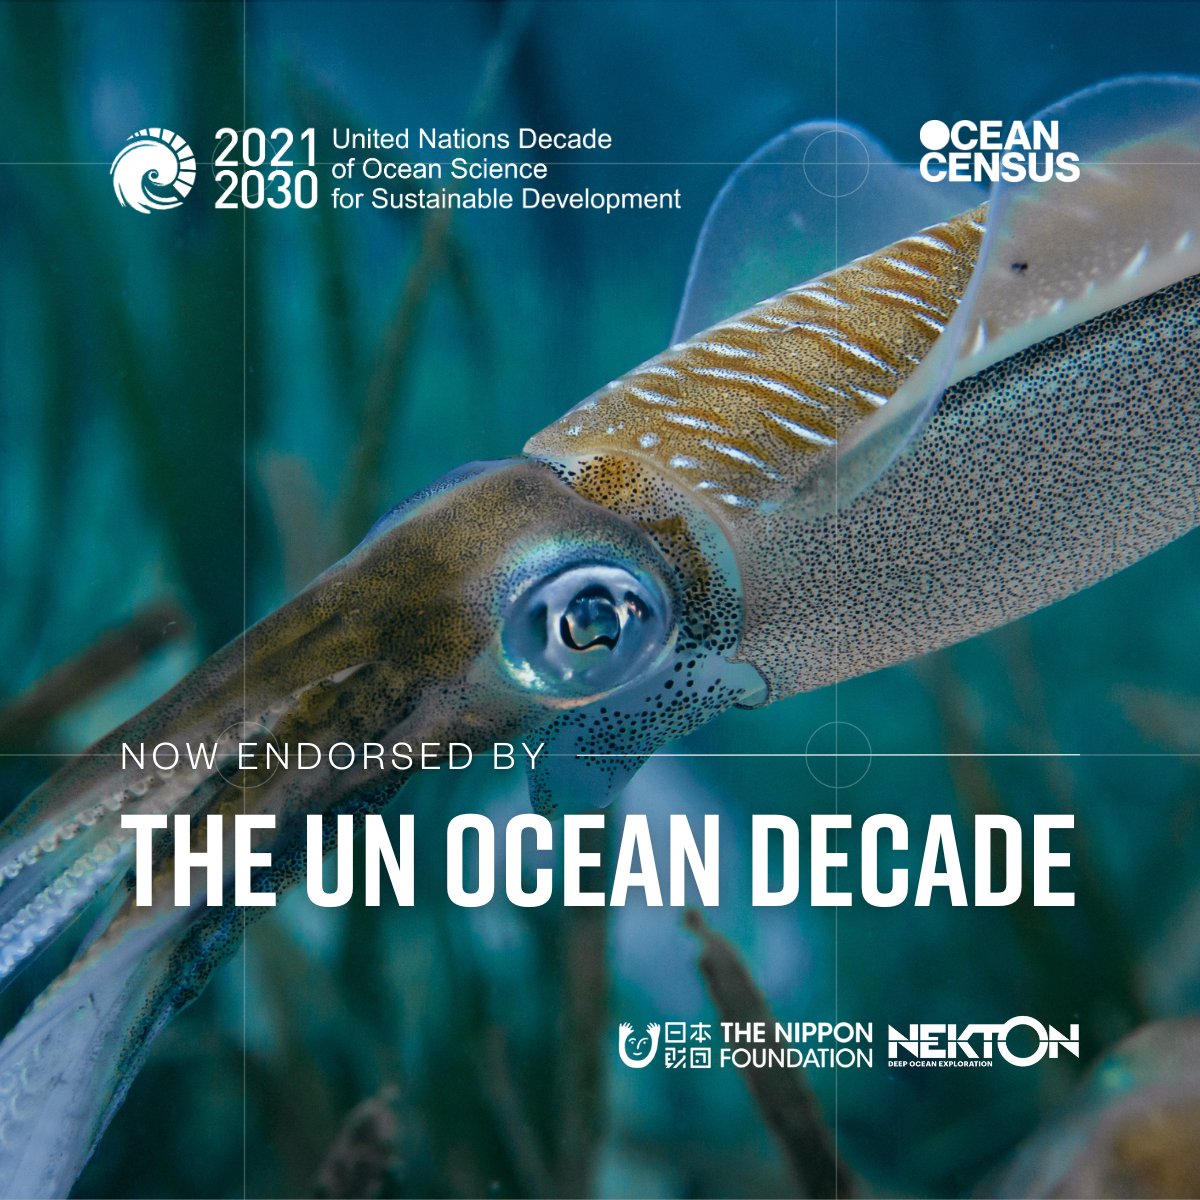 🎉 It’s official! Ocean Census has secured endorsement as a @UNOceanDecade Programme! 🌊 This cements our large-scale mission to transform knowledge of life beneath the waves as we strive for our next milestone of 100,000 new species. @NipponZaidan-@nektonmission #OceanDecade